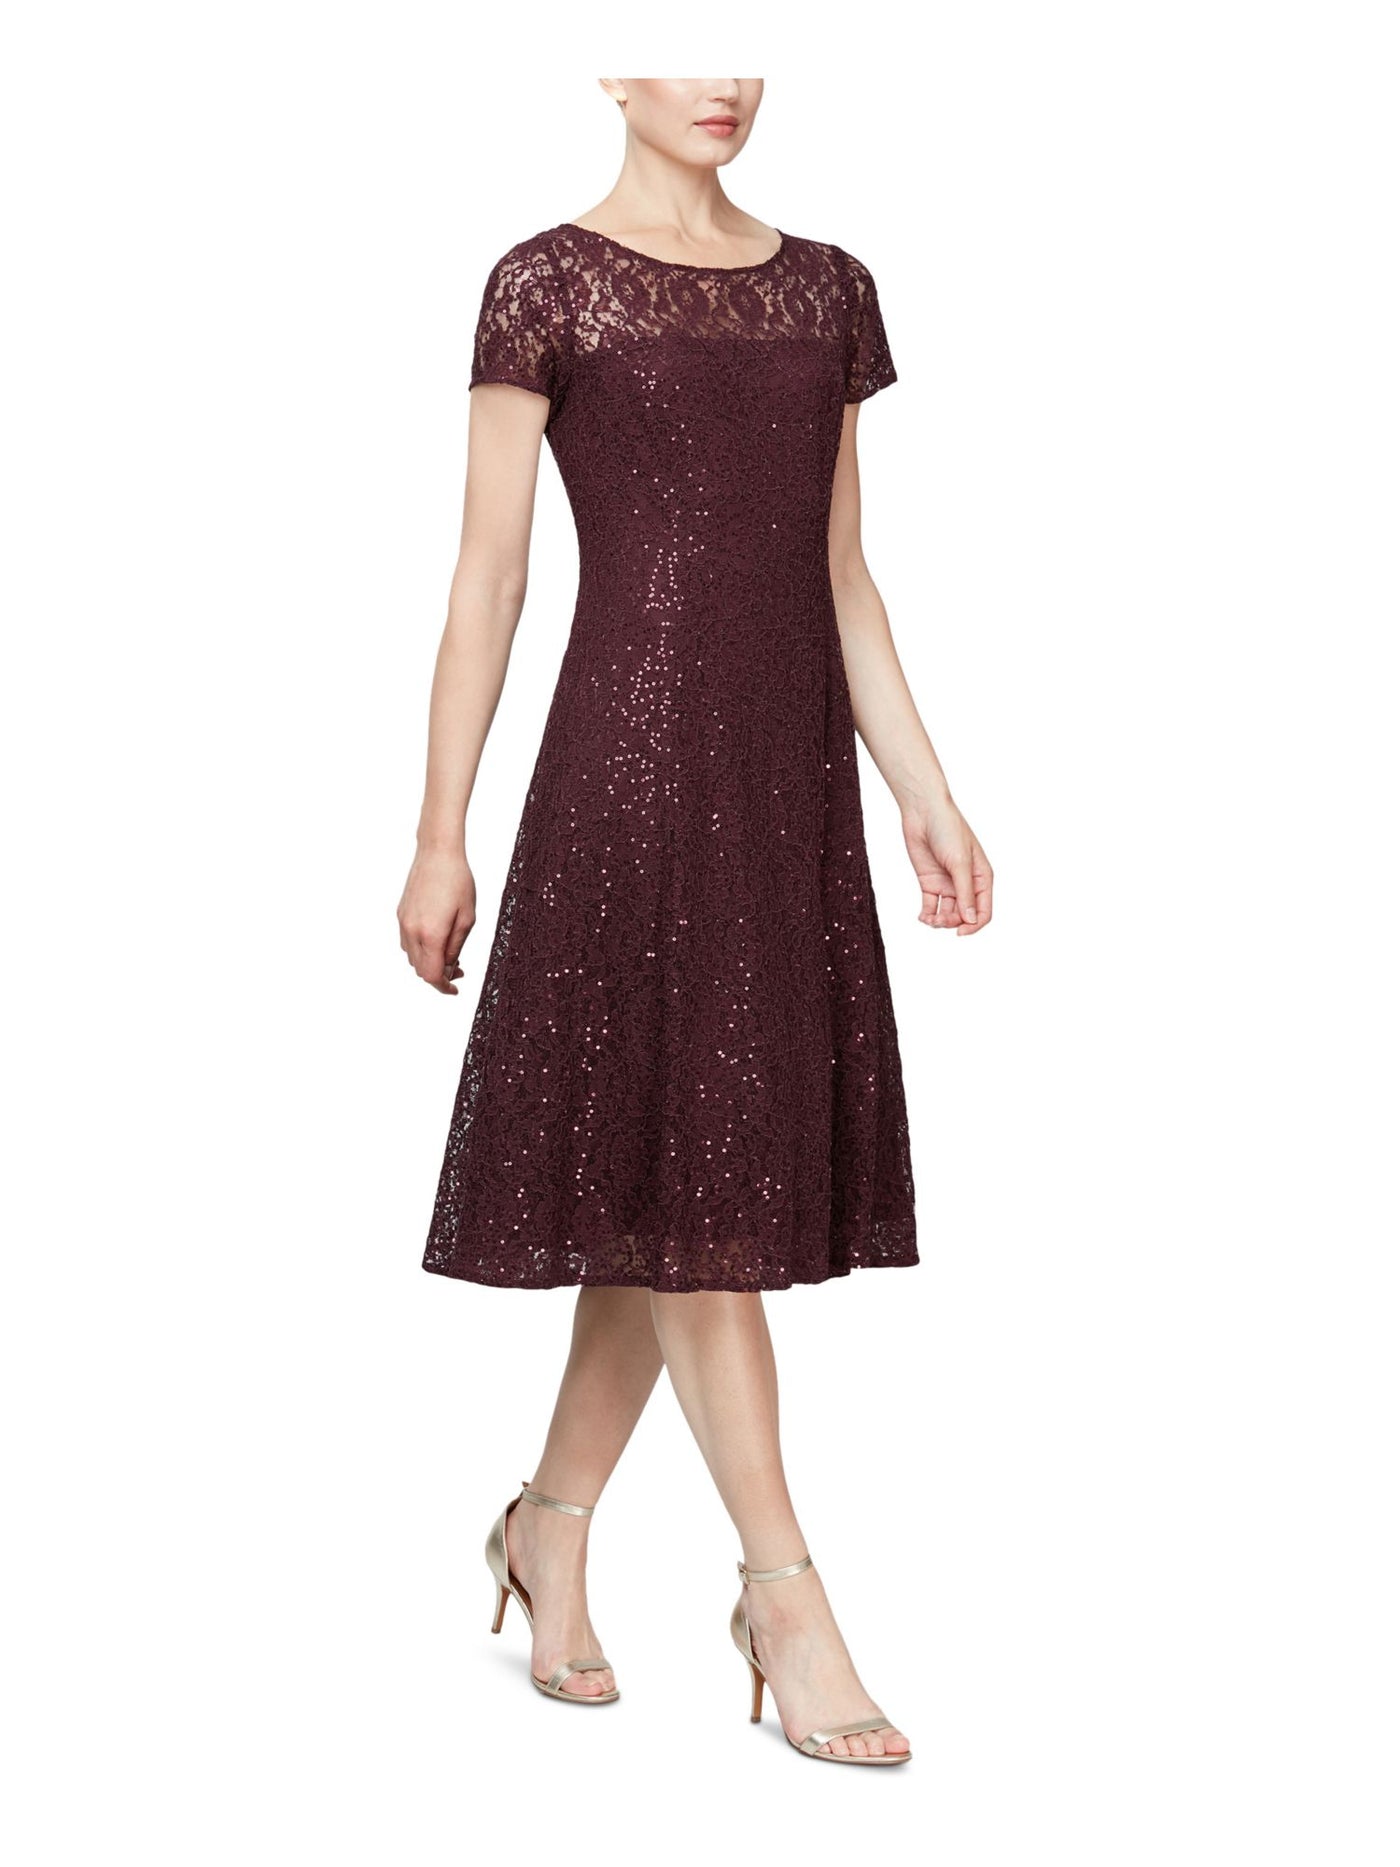 SLNY Womens Purple Lace Sequined Floral Cap Sleeve Scoop Neck Midi Party Fit + Flare Dress 6